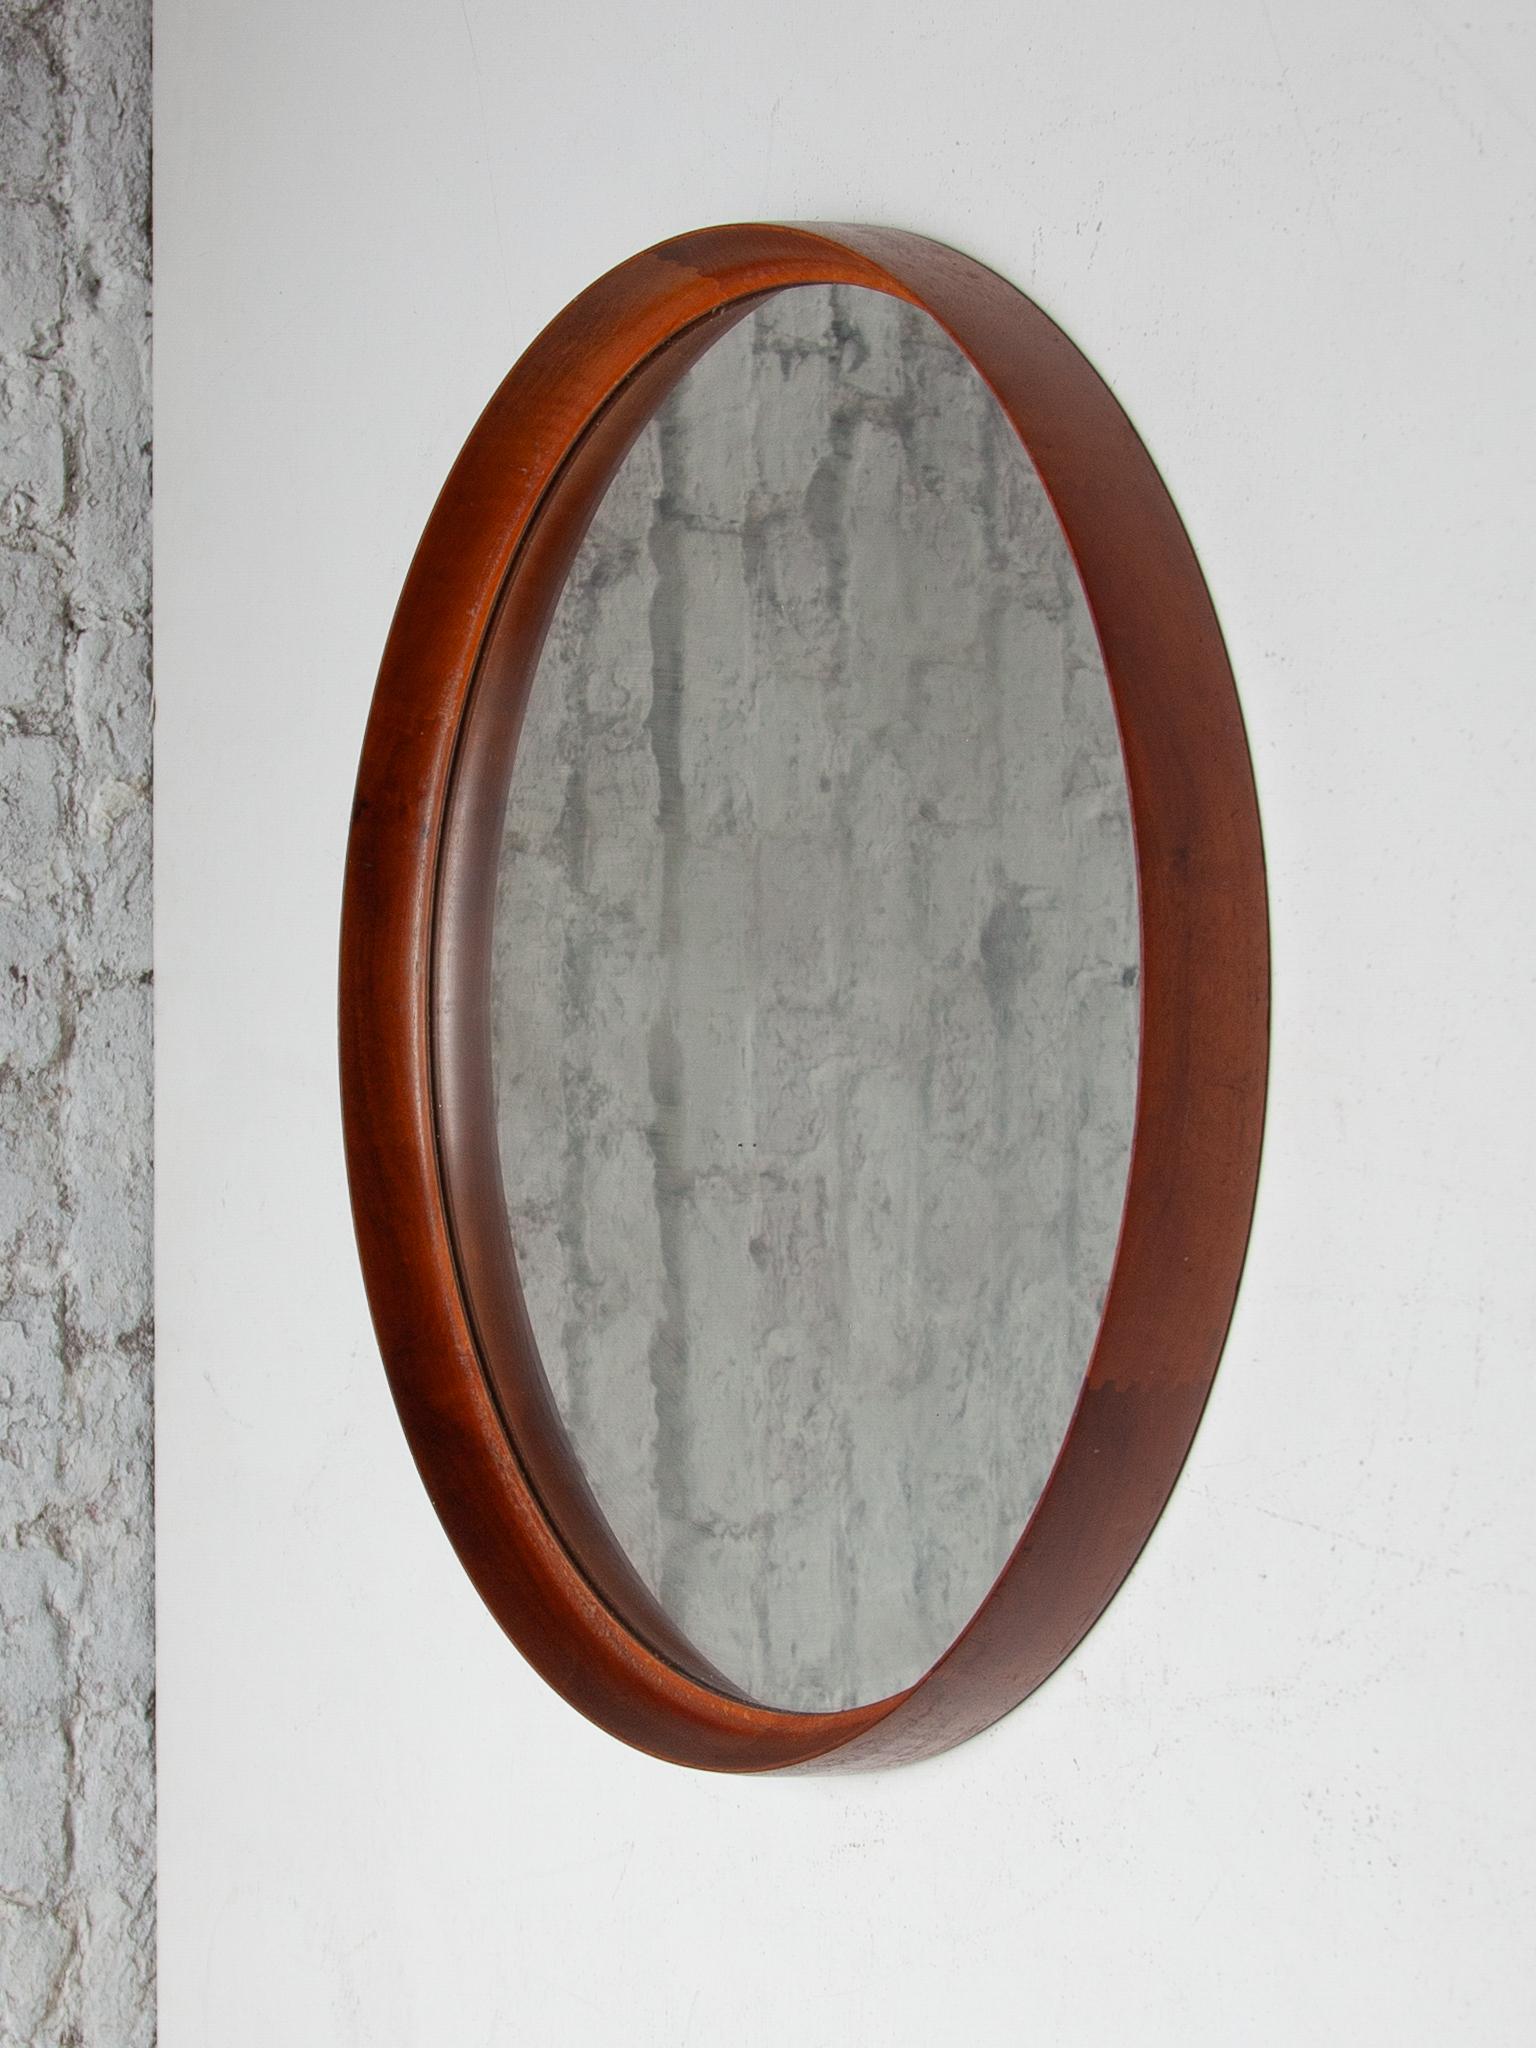 Vintage teak mirror, designed by Swedish designers Uno and Osten Kristiansson for Luxus at Vittsjö, Sweden in the 1960s, It's an exquisite and superb piece for entrance way to bathroom use.  Made in a gorgeous solid teak frame, this highly